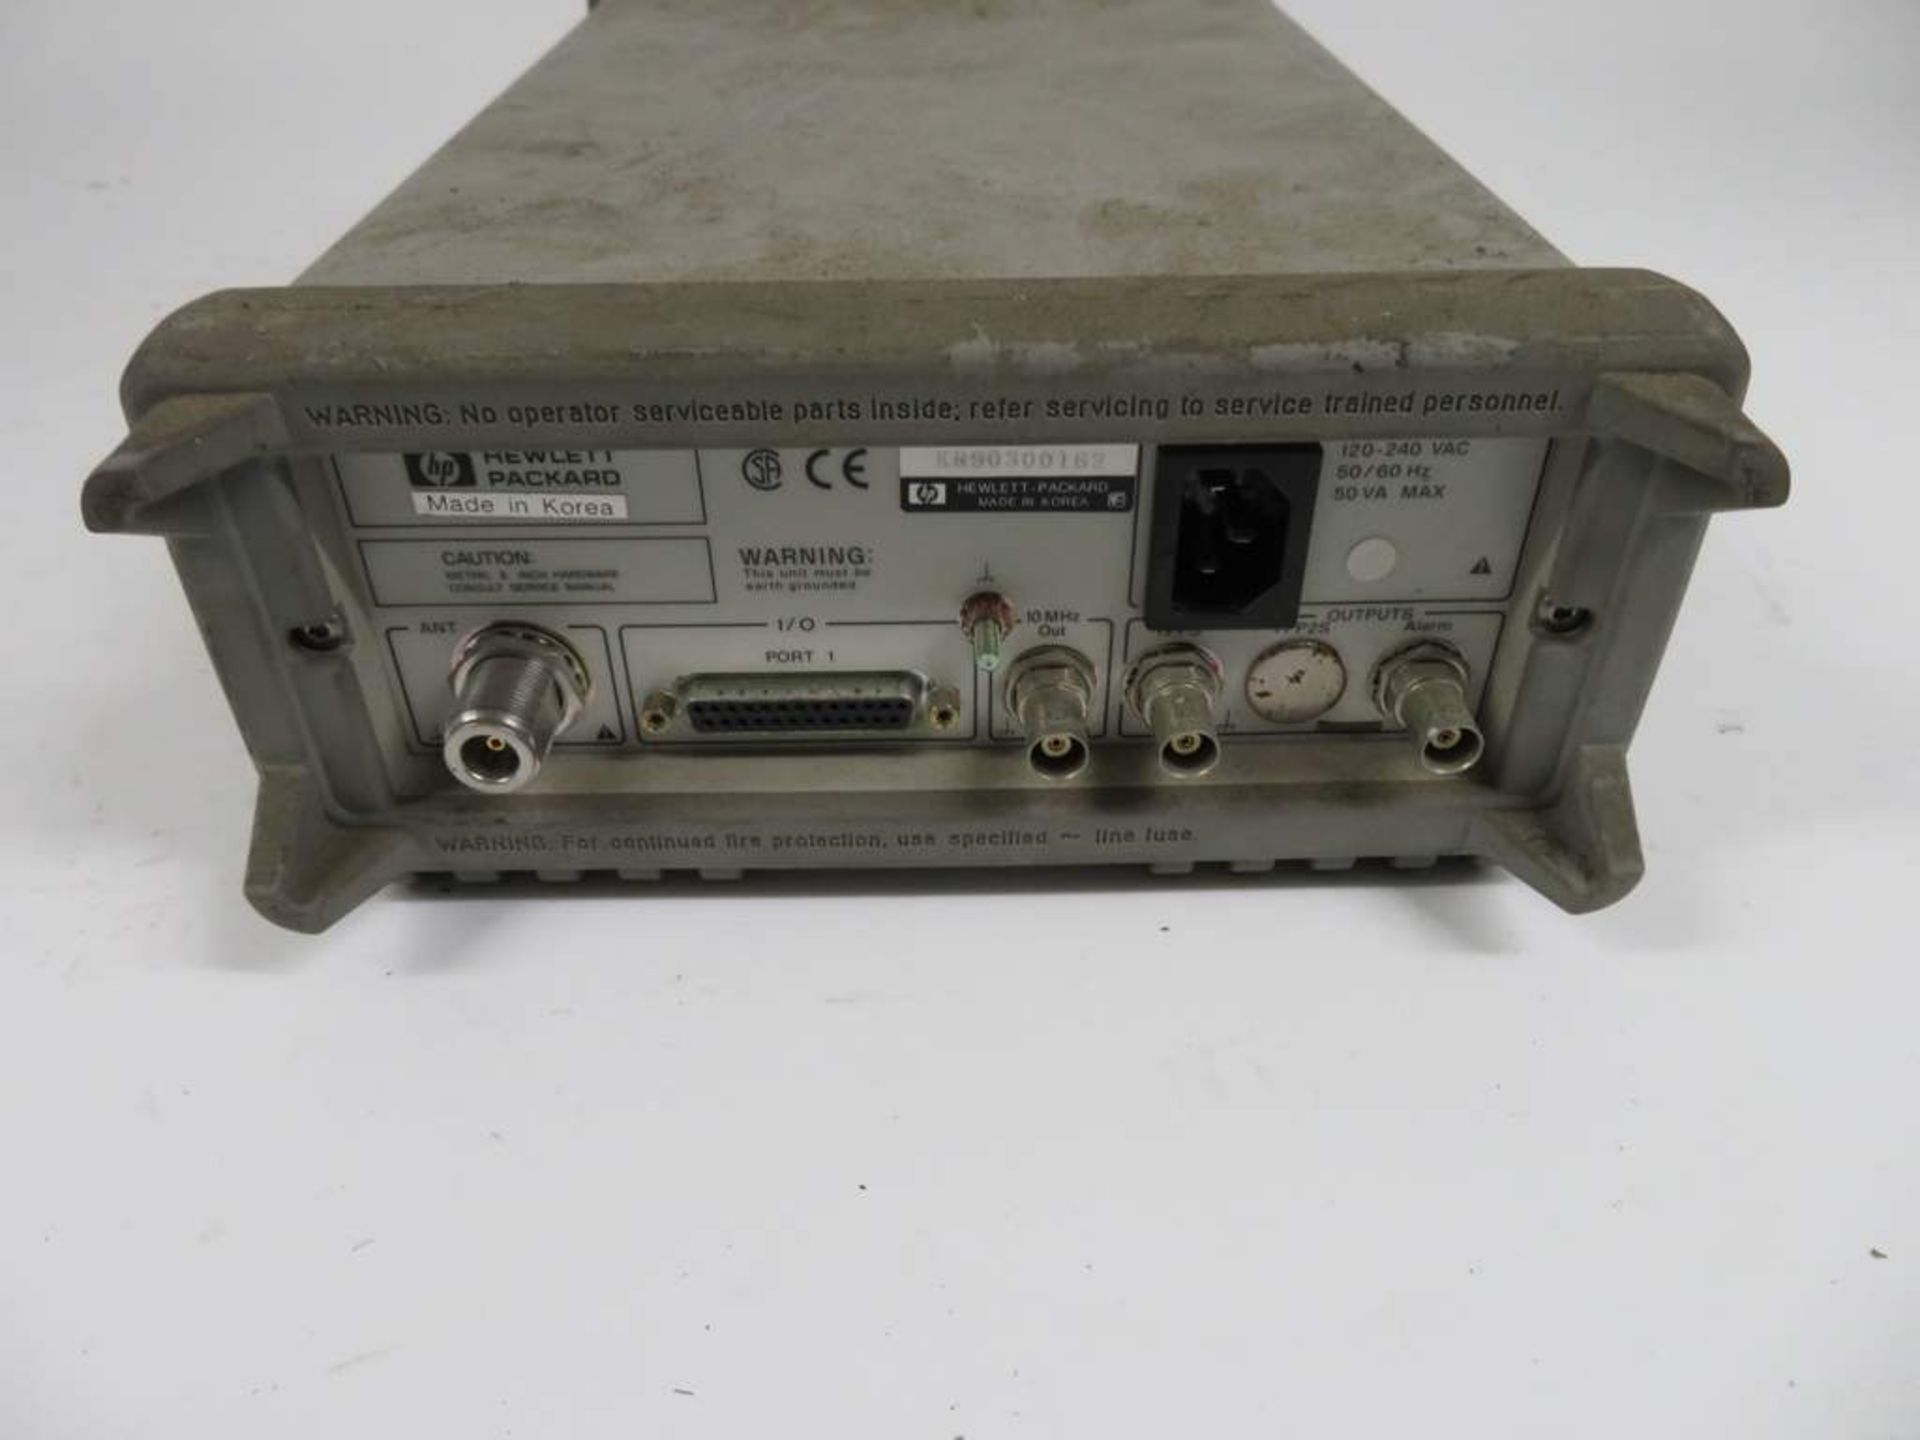 Hewlett Packard 58503B GPS time and frequency reference receiver - Bild 3 aus 3